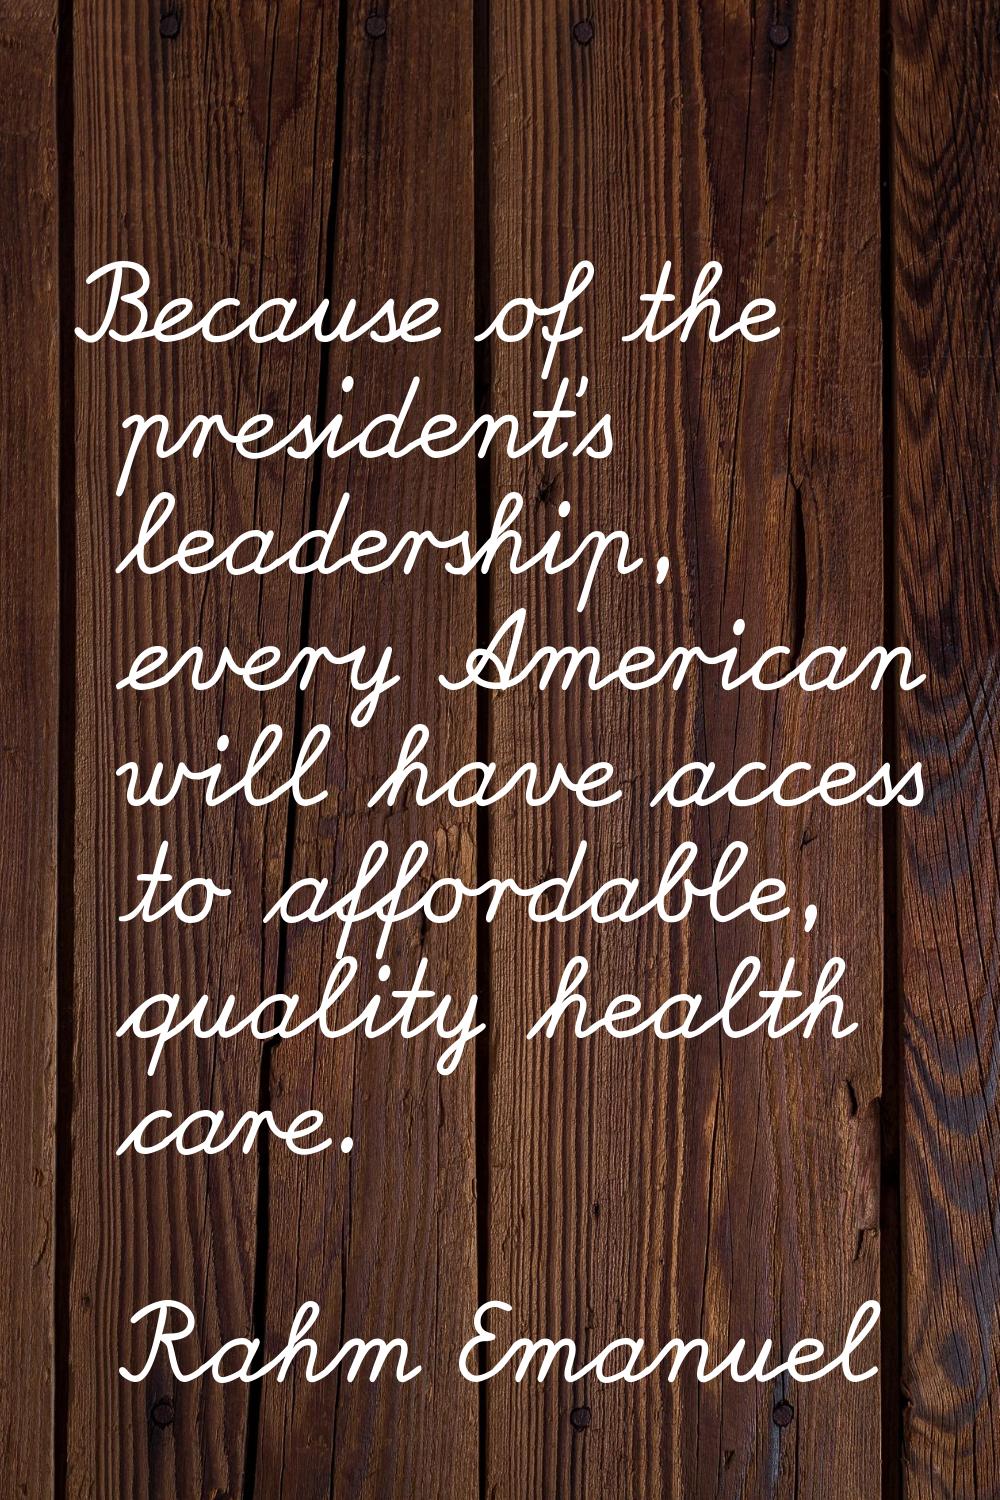 Because of the president's leadership, every American will have access to affordable, quality healt